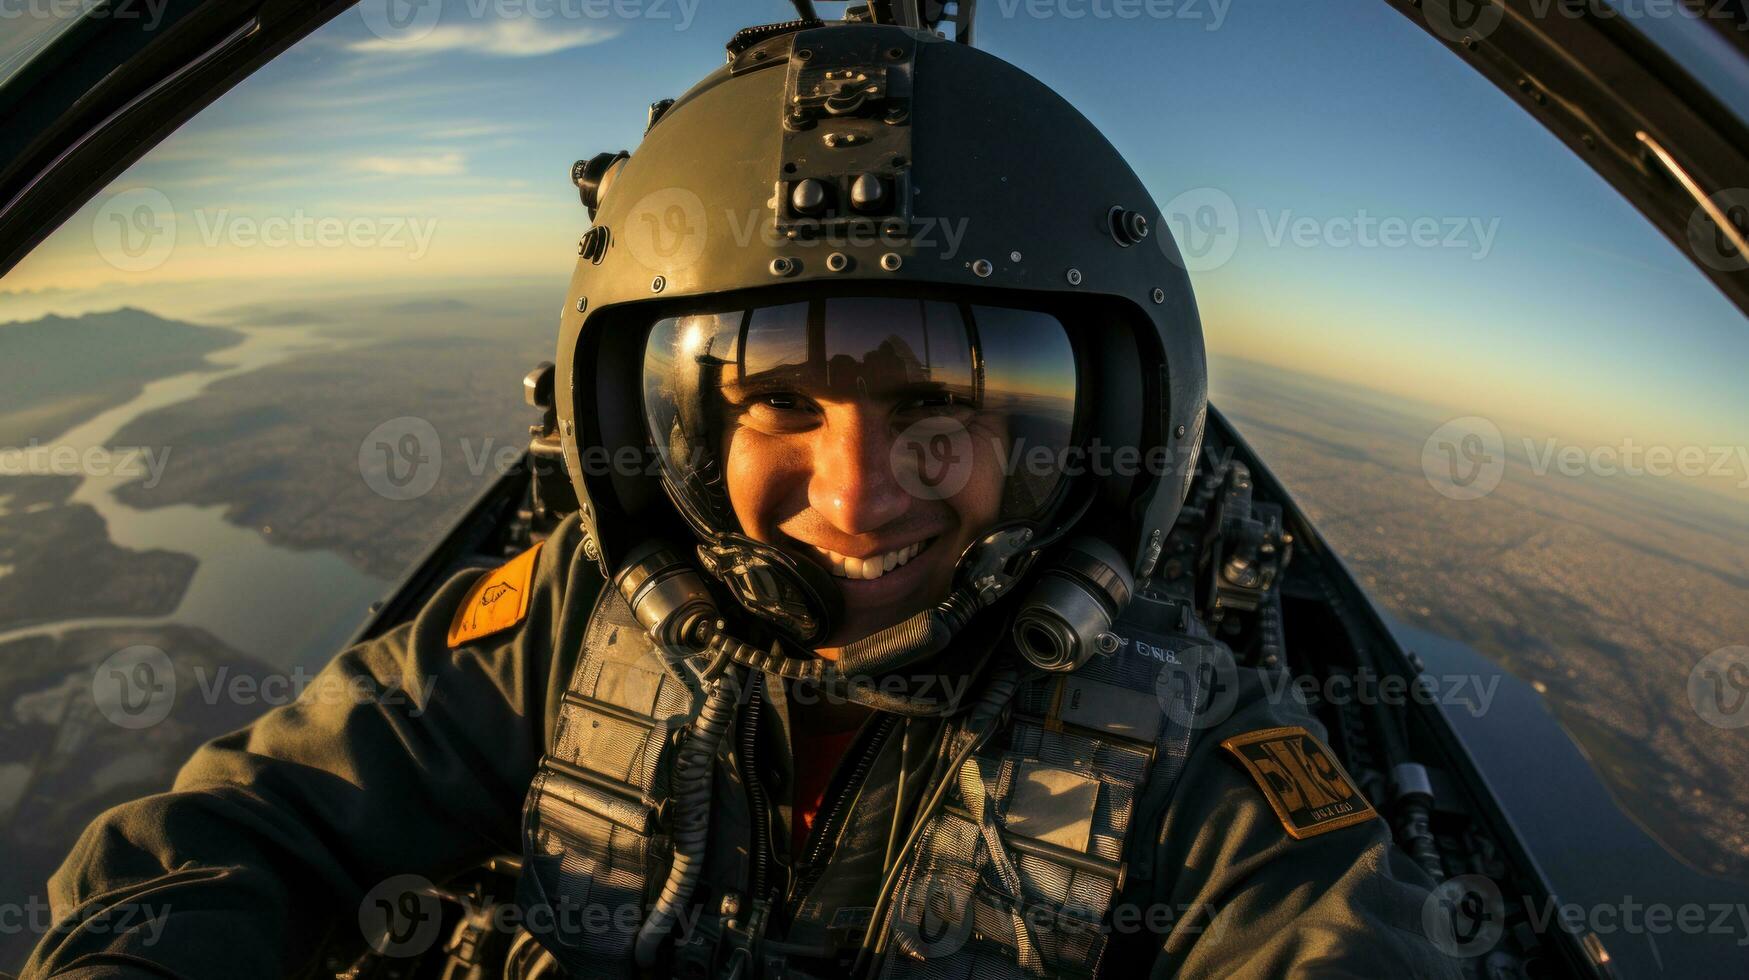 View from the cockpit of a pilot in a winged helmet. photo